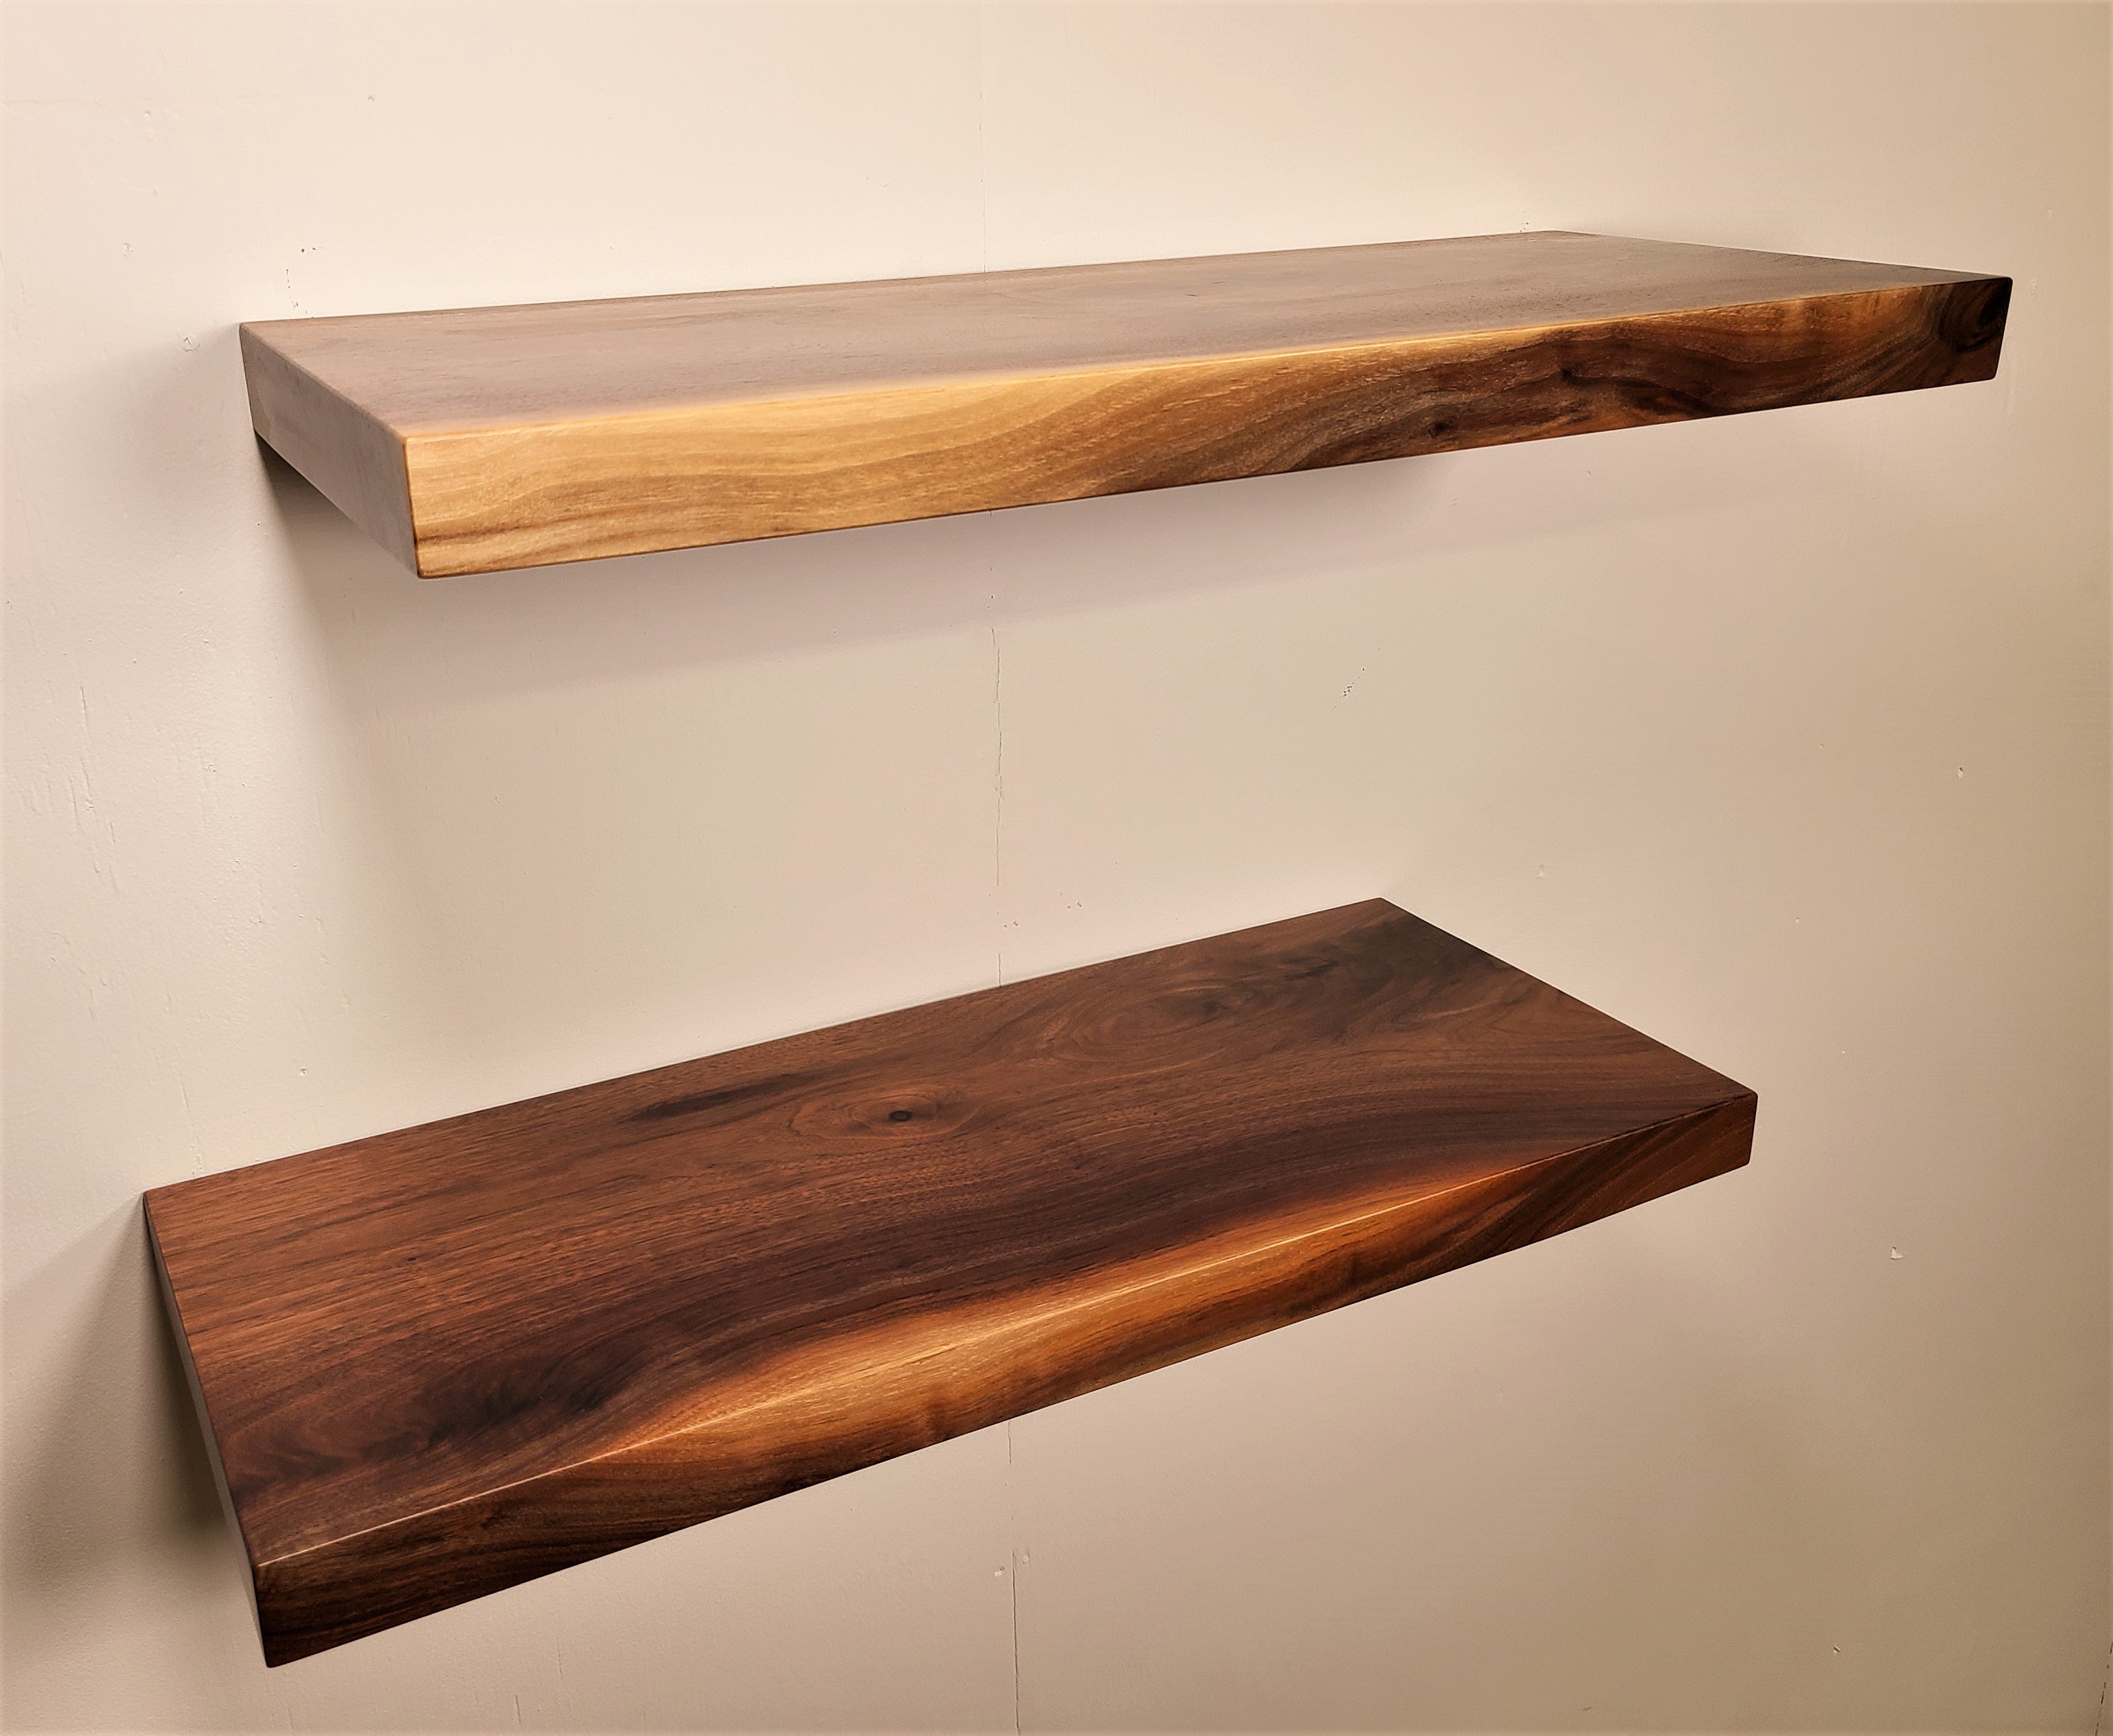 top view of custom walnut rustic wood shelves made in Lancaster Pennsylvania by Zimboards.